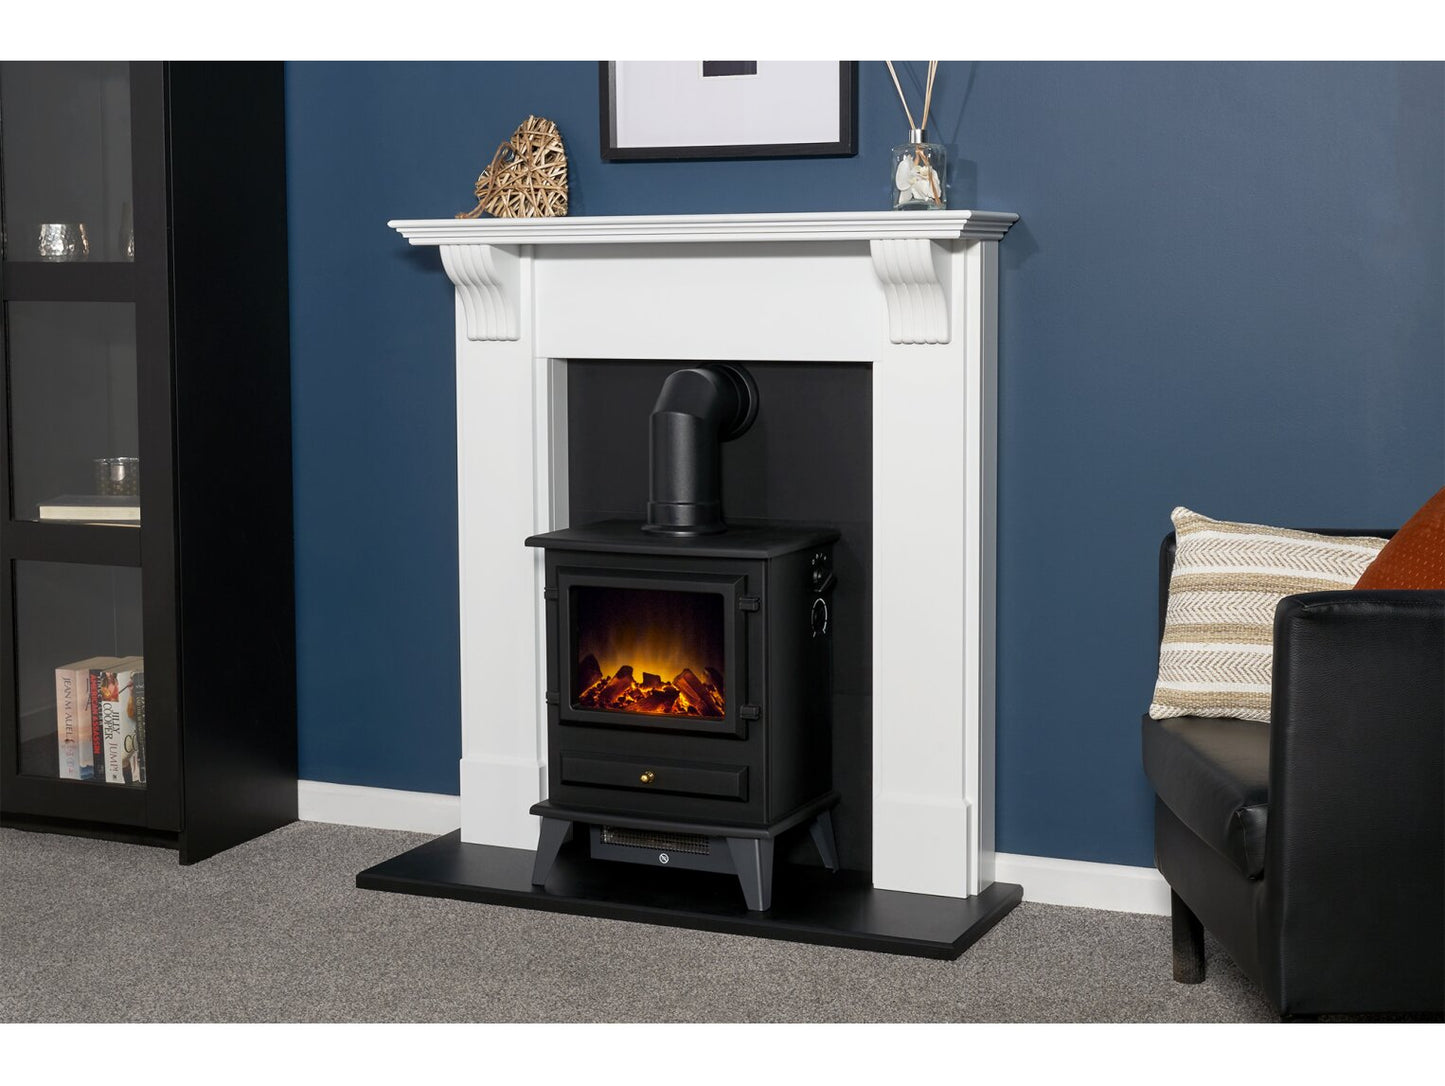 Adam Harrogate Stove Fireplace with Hudson Electric Stove 39 Inch 20943 Pure White & Black